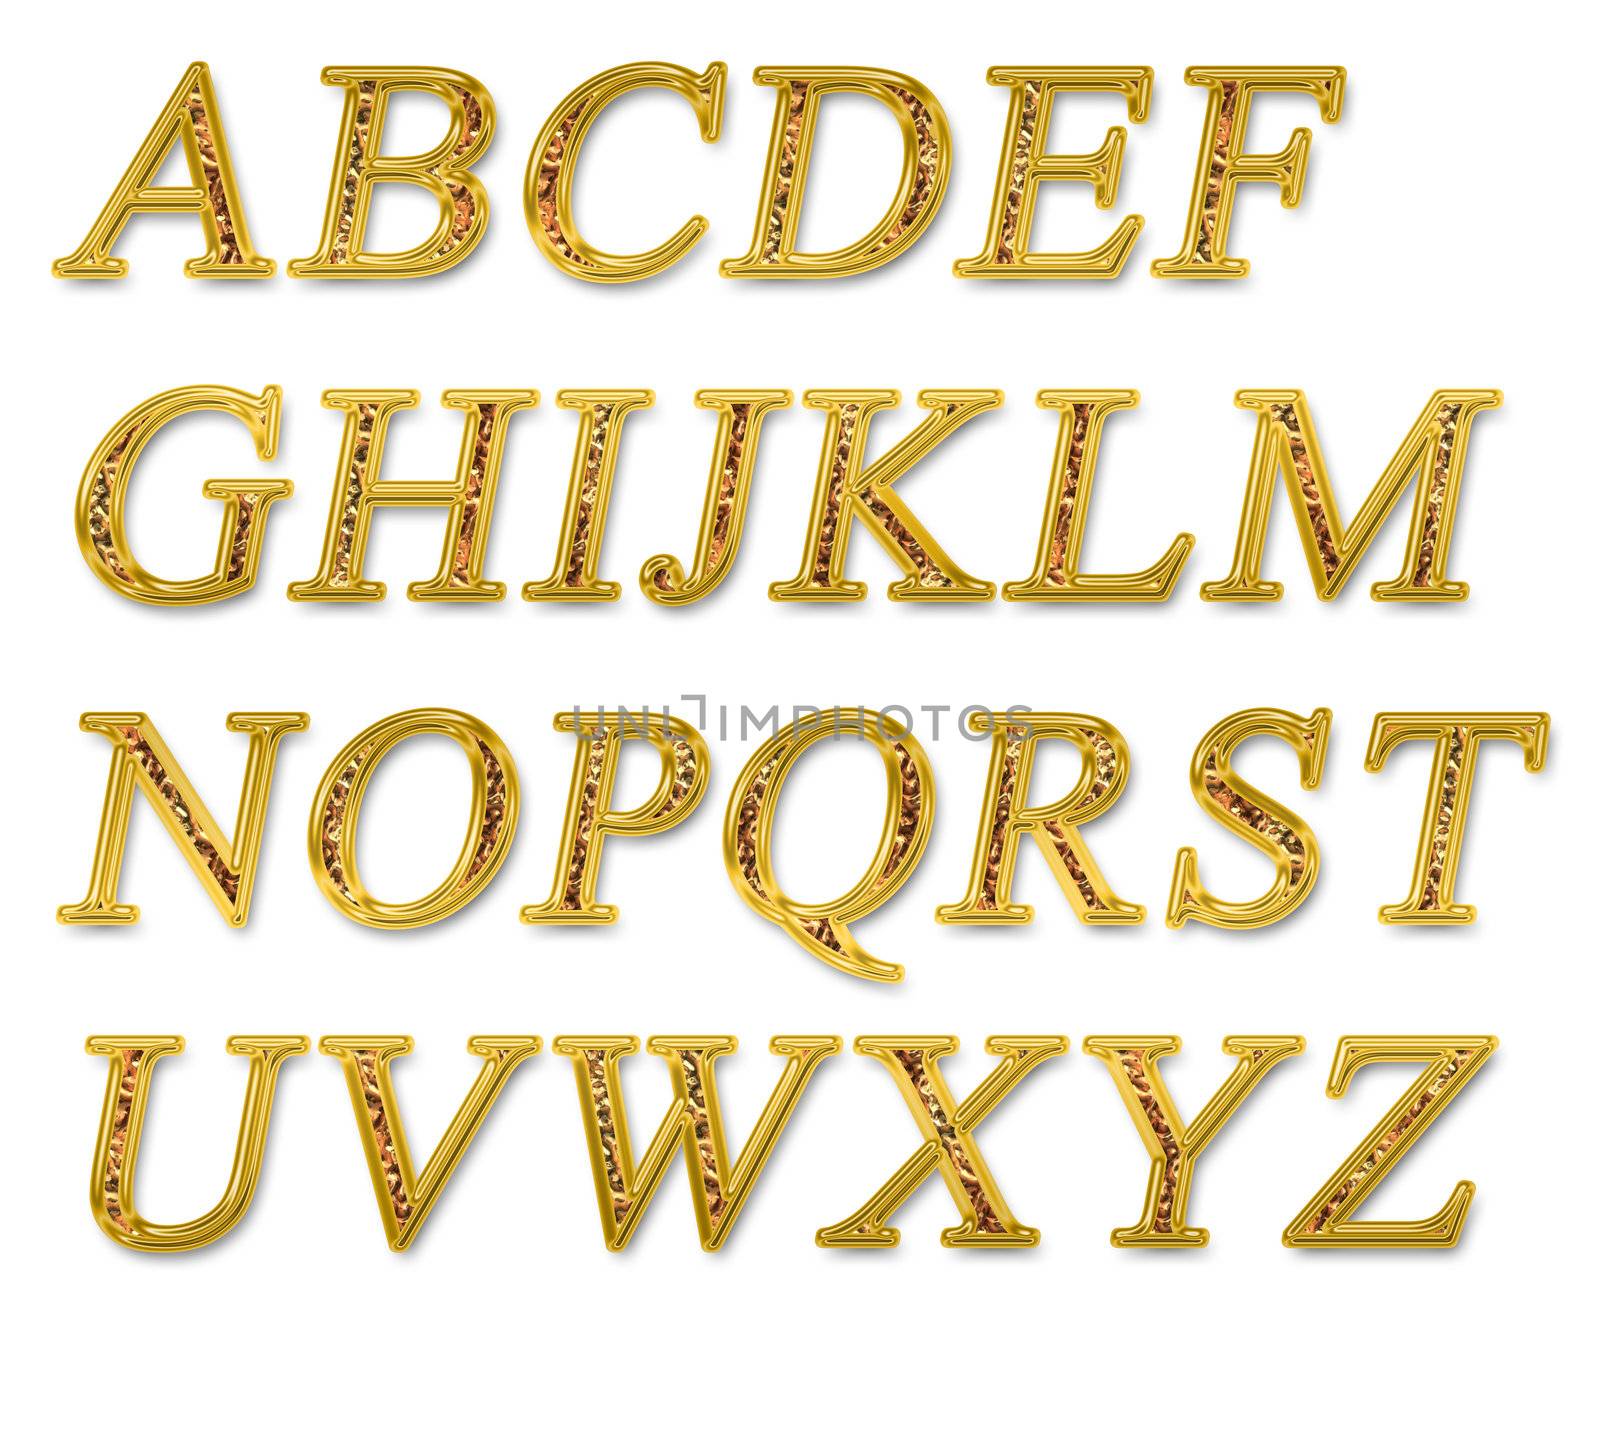 Alphabet on a white background with a gold texture